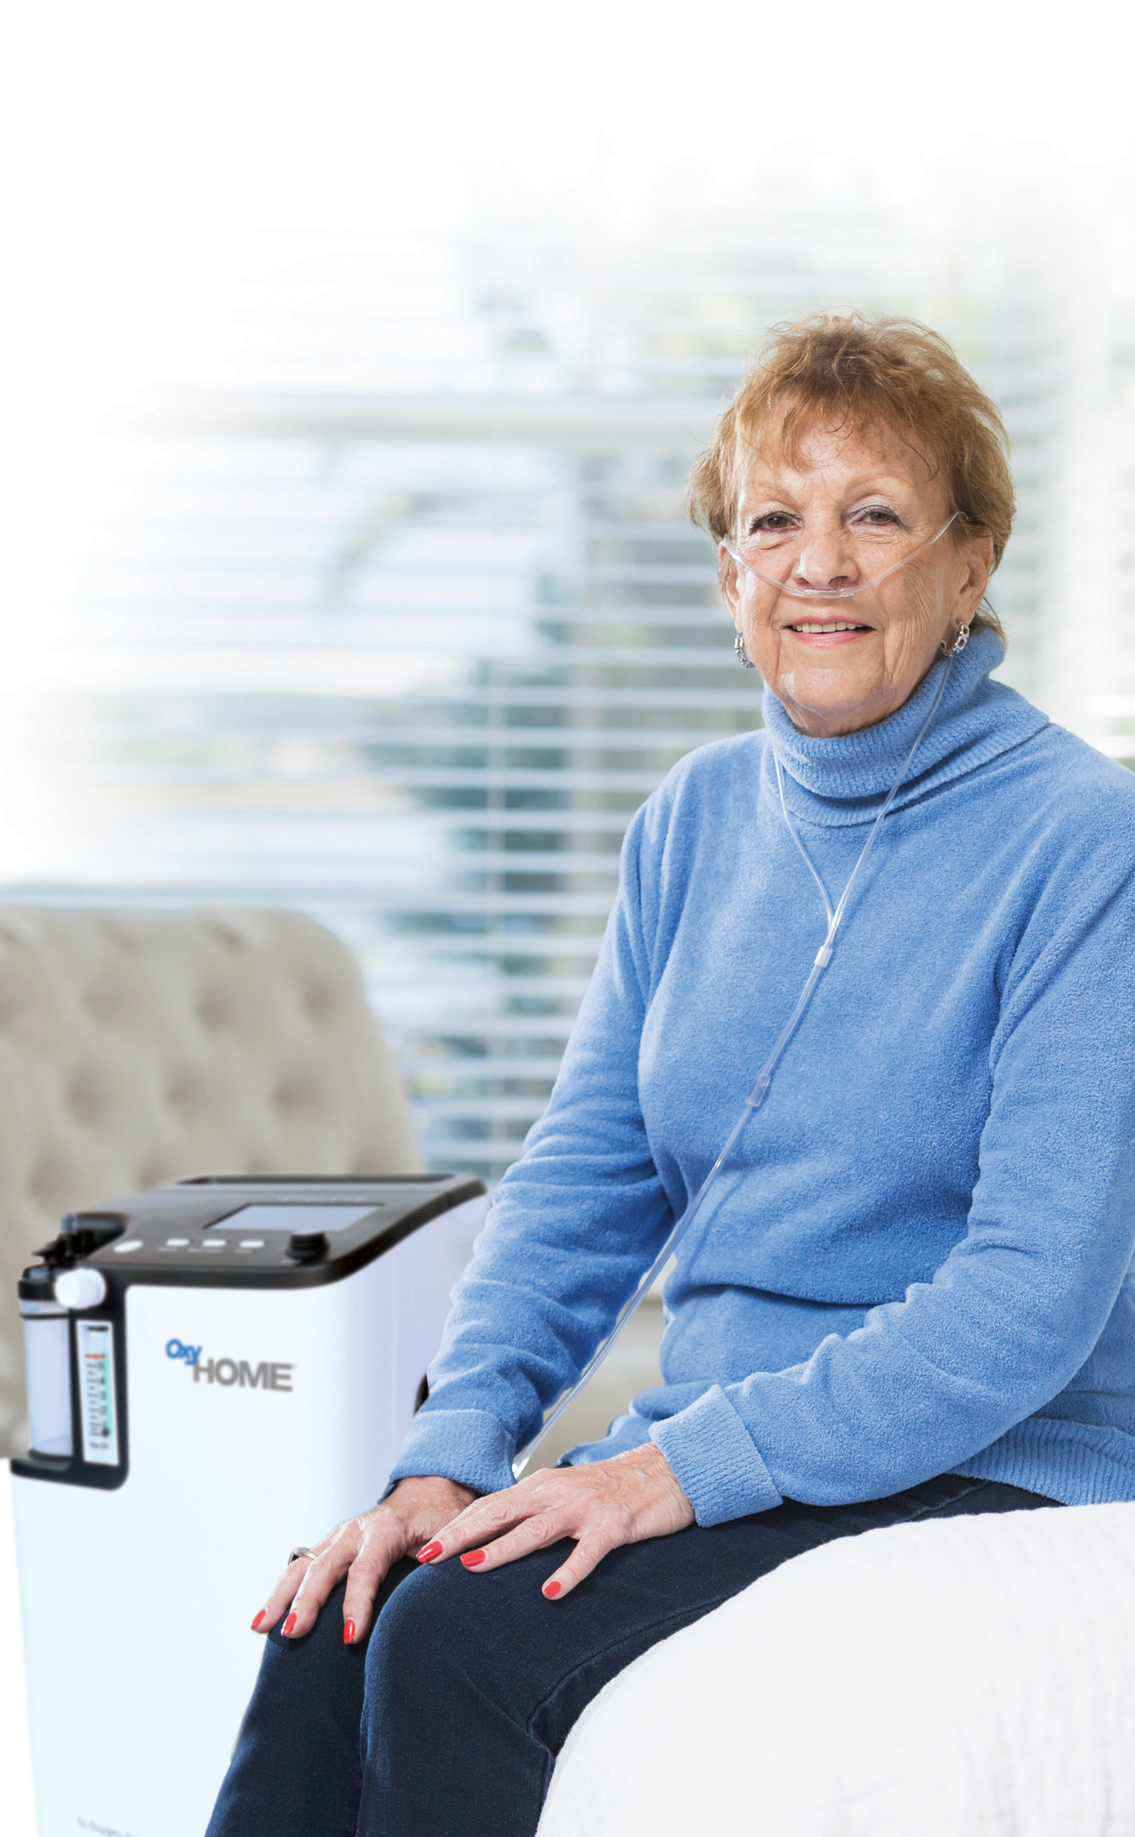 OxyHome Stationary Oxygen Concentrator